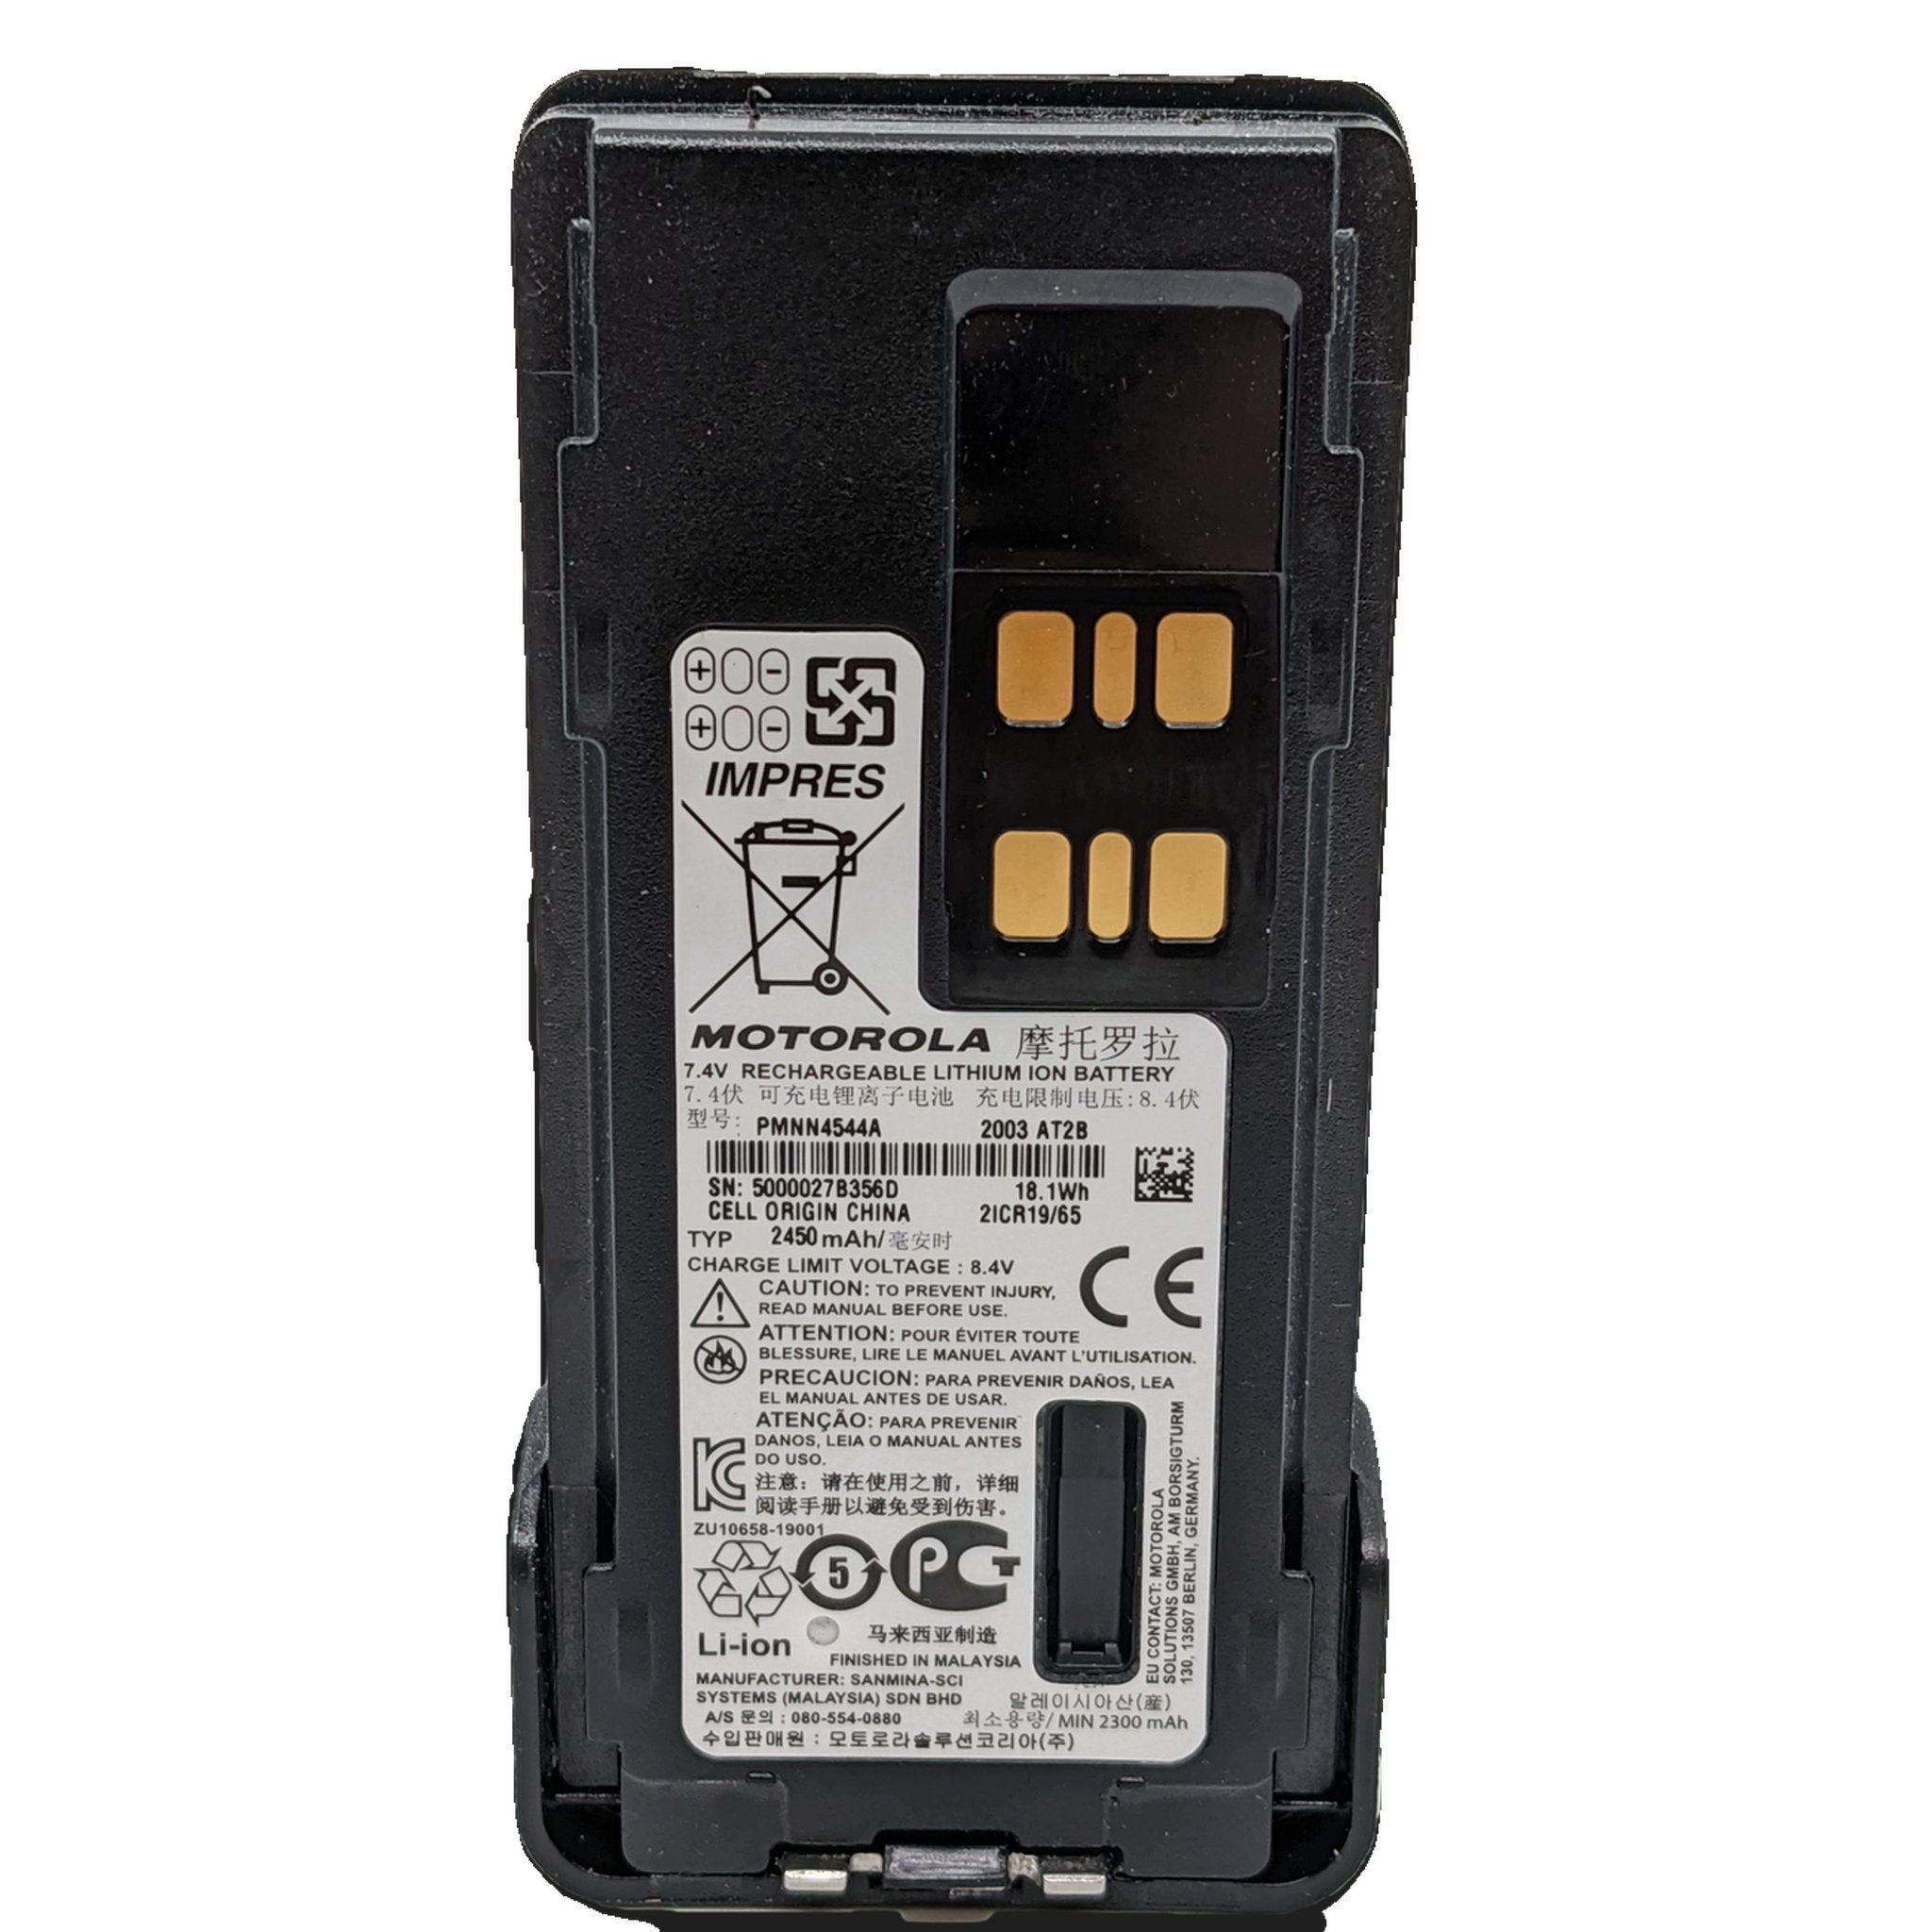 PMNN4544A Motorola IMPRES Battery for XPR Two Way Radio - Li-Ion (2450